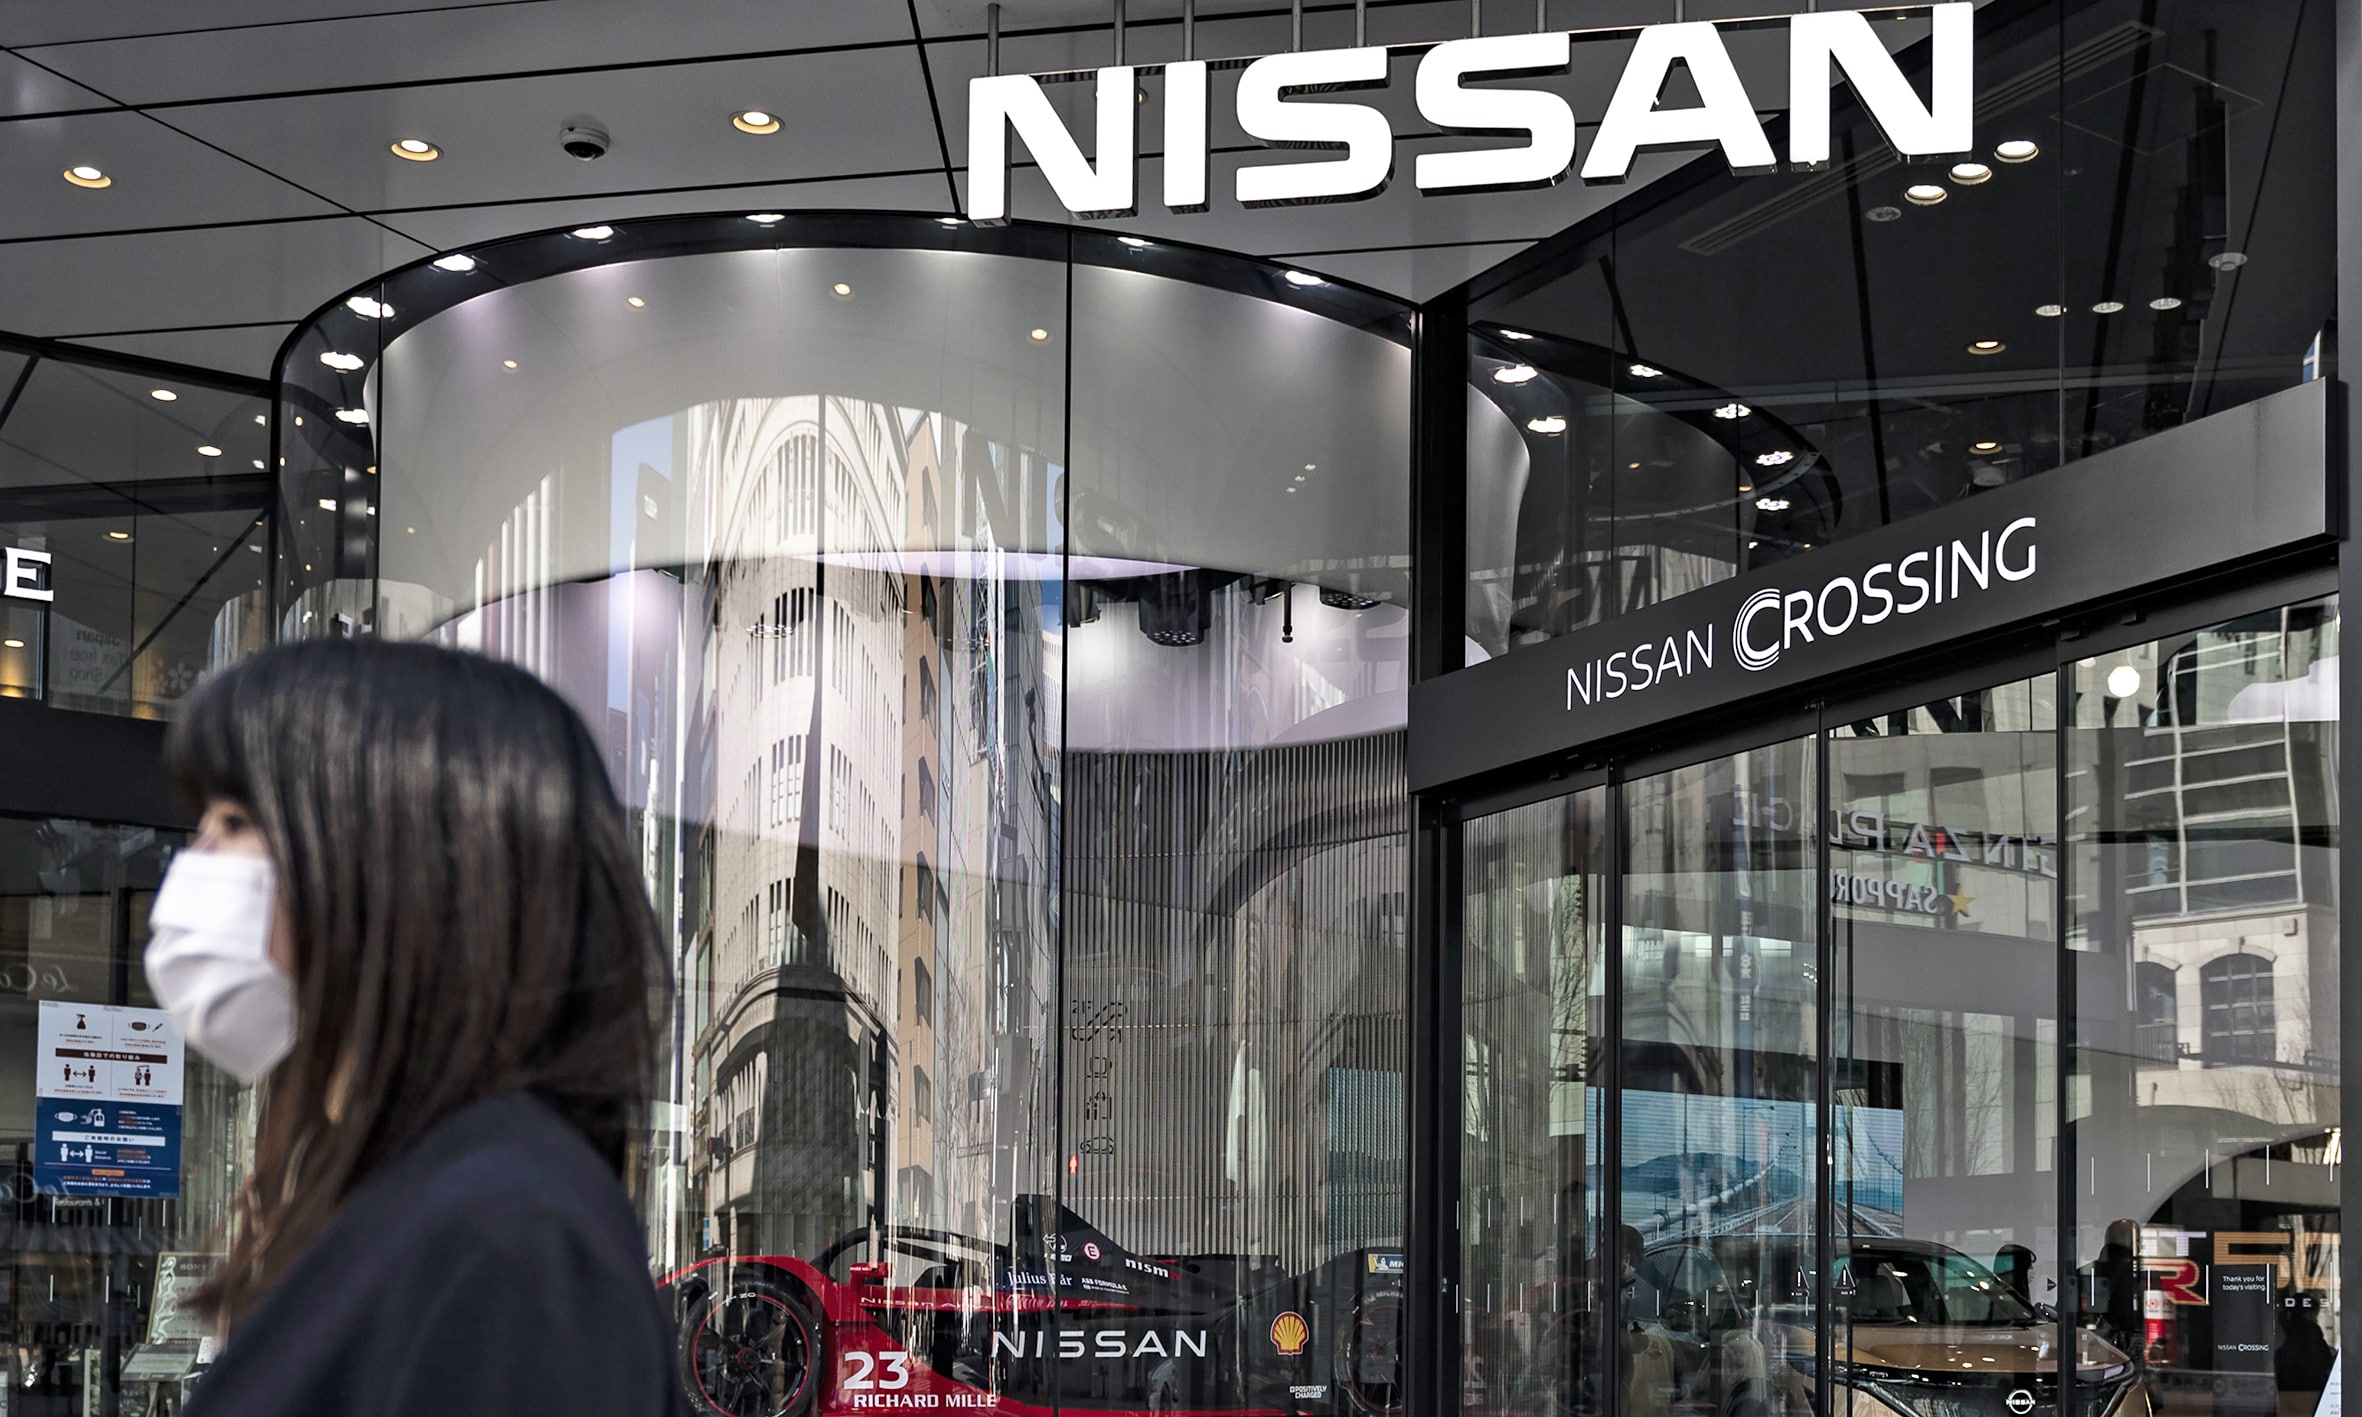 TOKYO: File photo shows a woman standing in front of the Nissan showroom in the Ginza district of Tokyo. Nissan said on May 11, 2023 its full-year net profit slightly topped its estimate and offered an upbeat forecast for the fiscal year ahead. – AFP